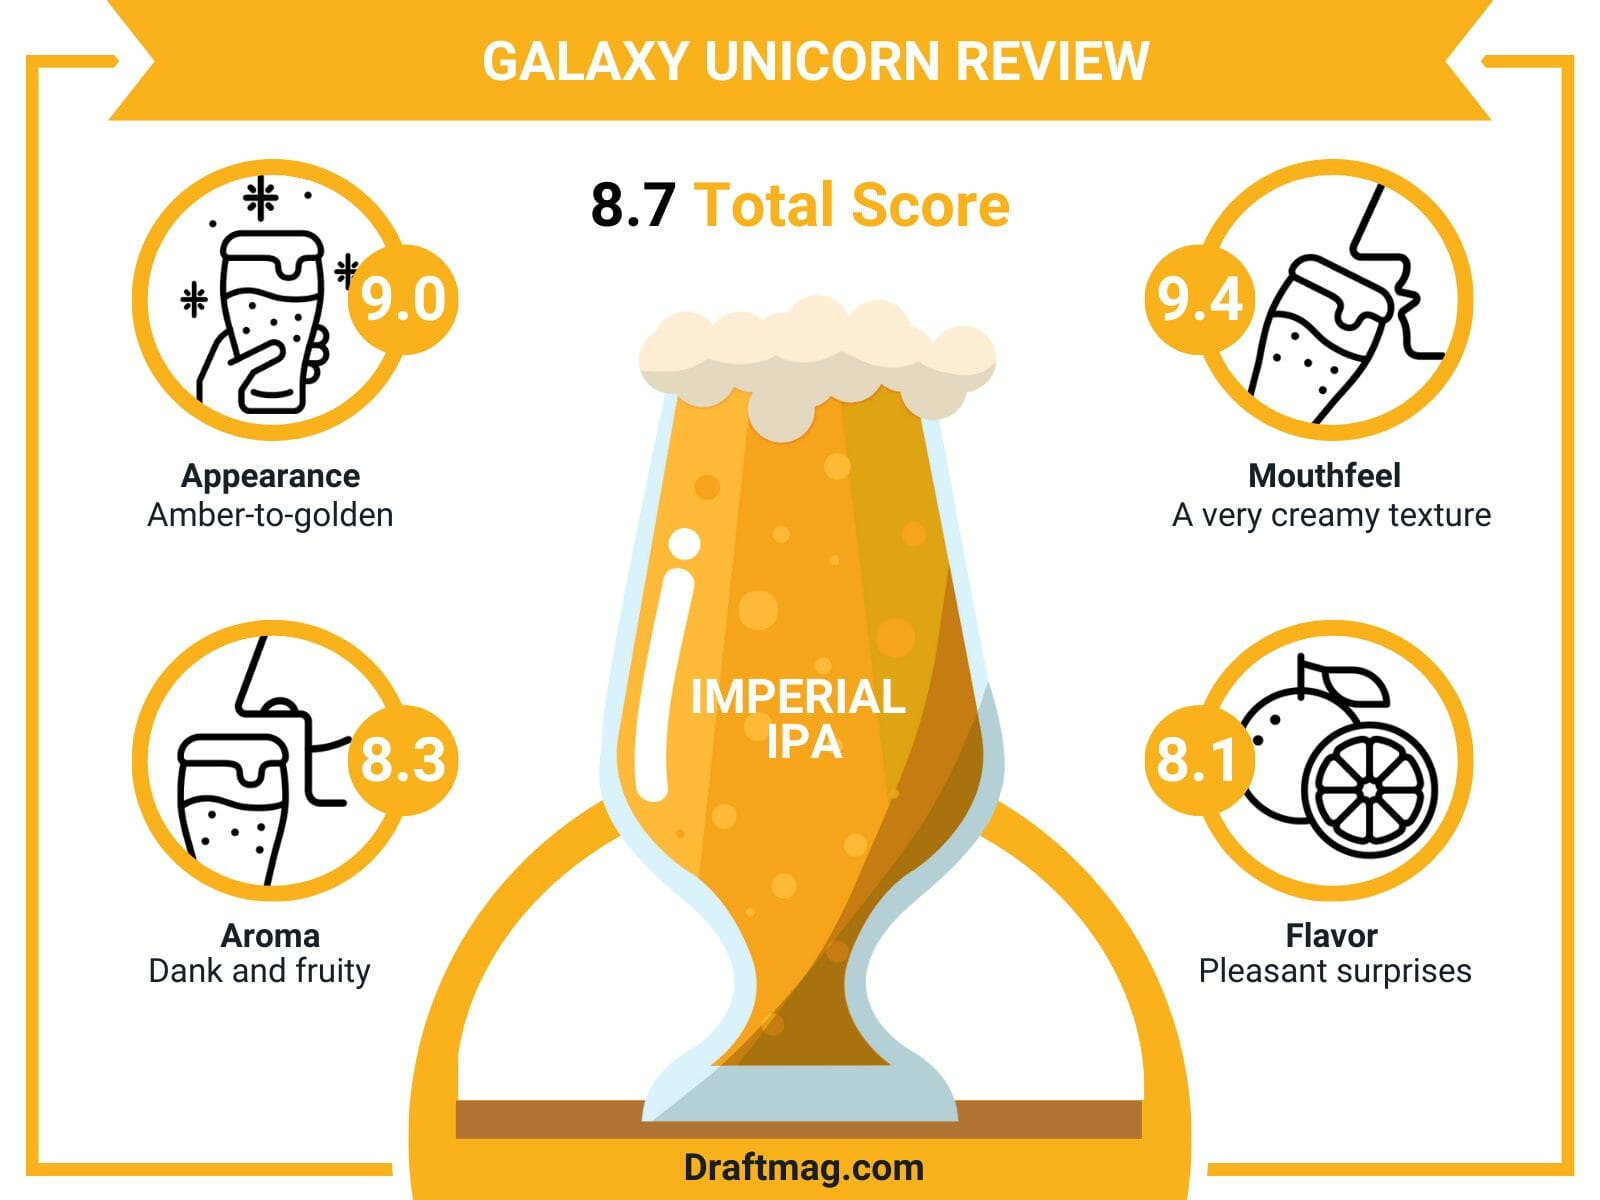 Galaxy unicorn review infographic